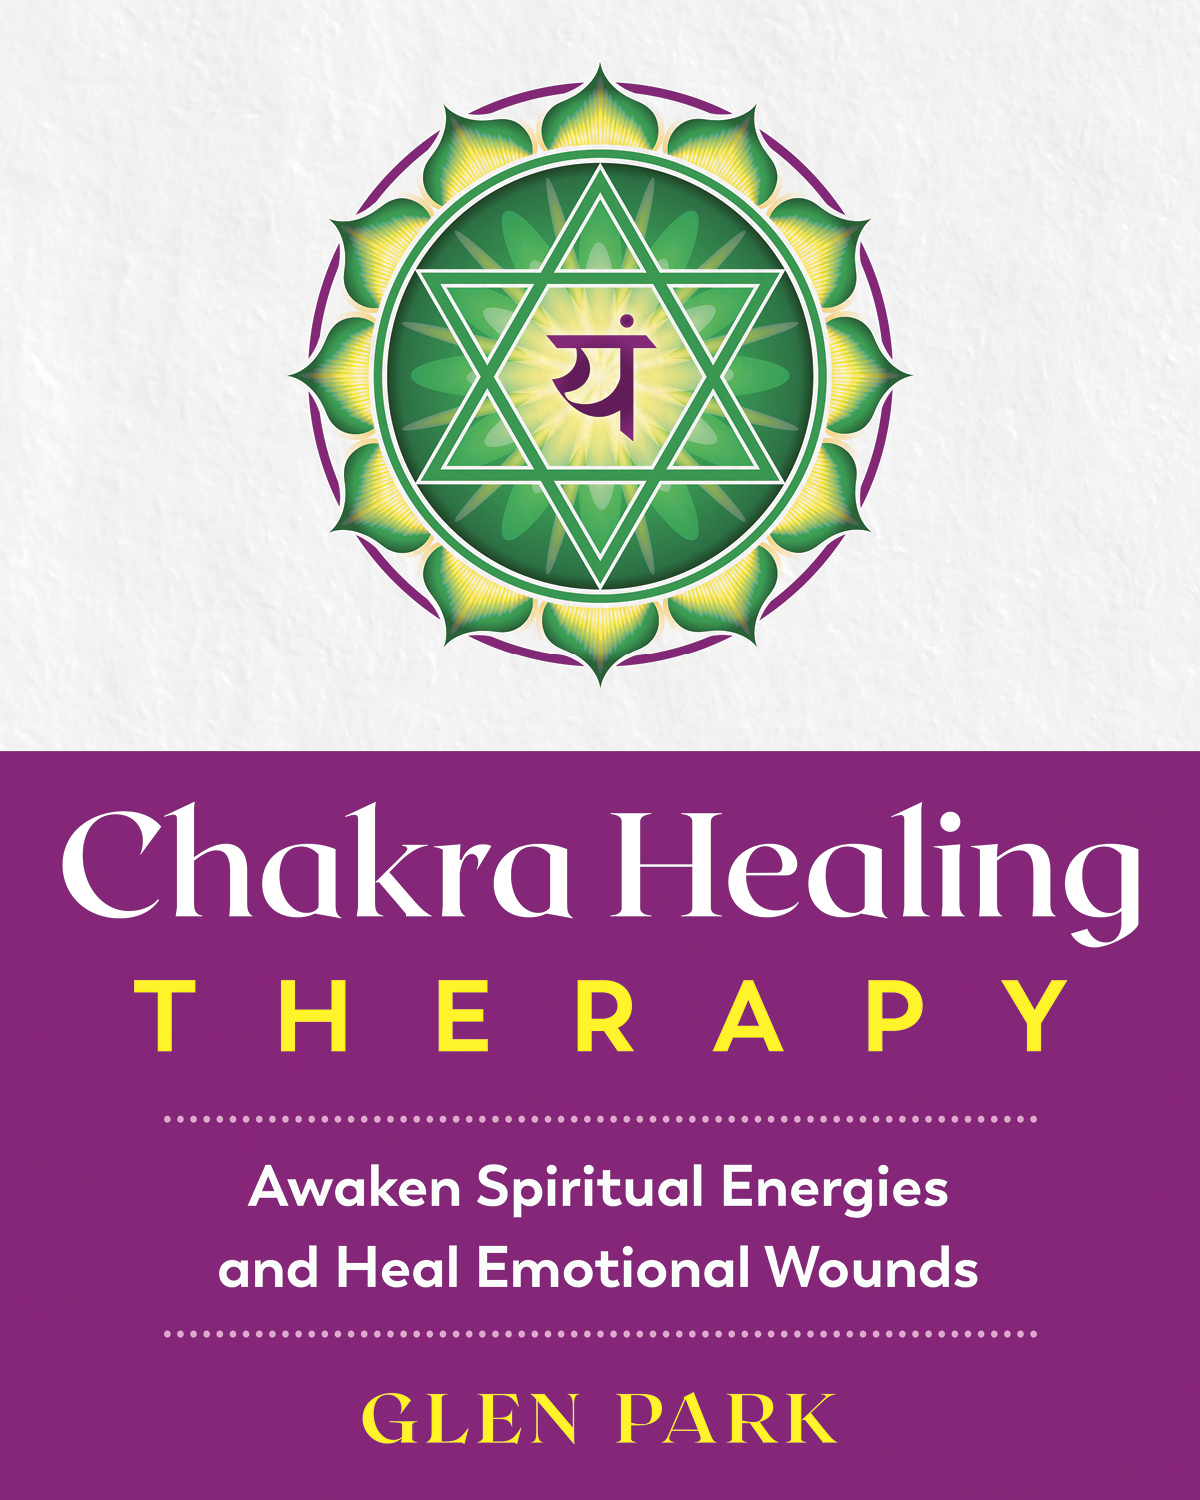 Chakra Healing Therapy by Glen Park